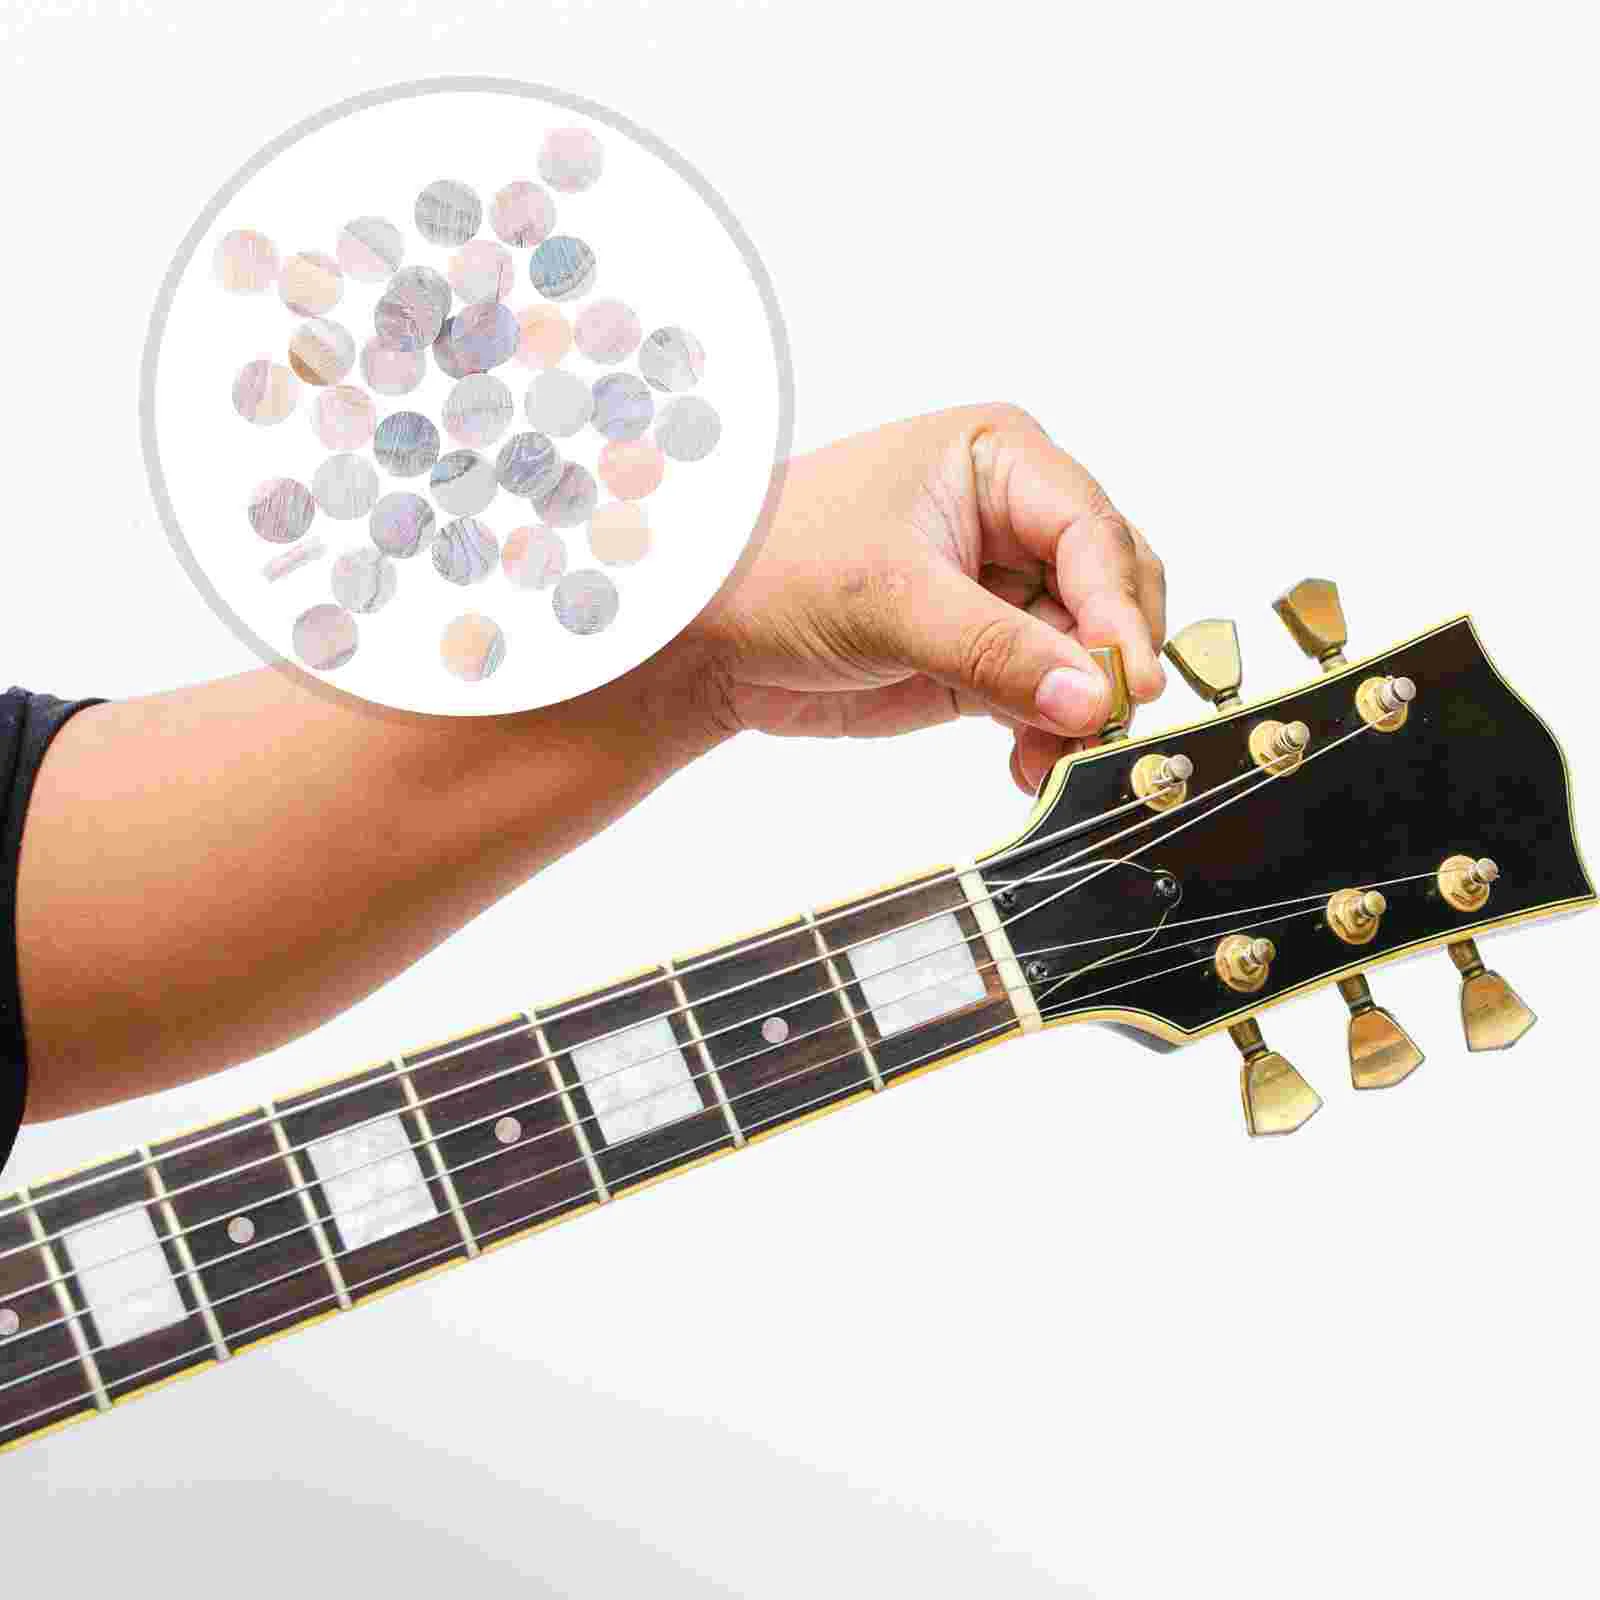 40 Pcs Musical Gifts Fingerboard Position Marker Guitar Bass Side Dot Guitar Side Dot Marker Guitar Bass Accessory enlarge